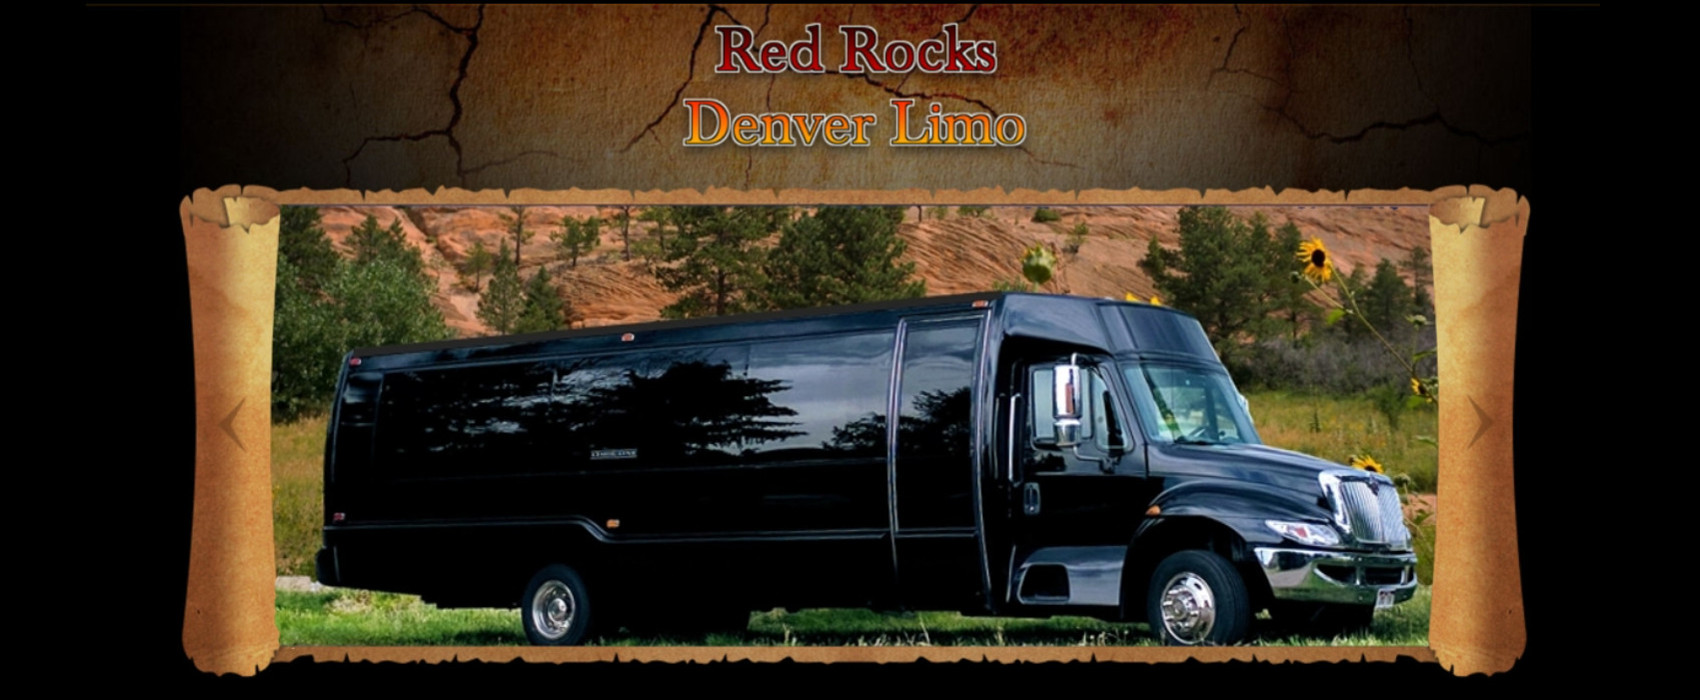 Red Rocks Denver Limo Party Bus